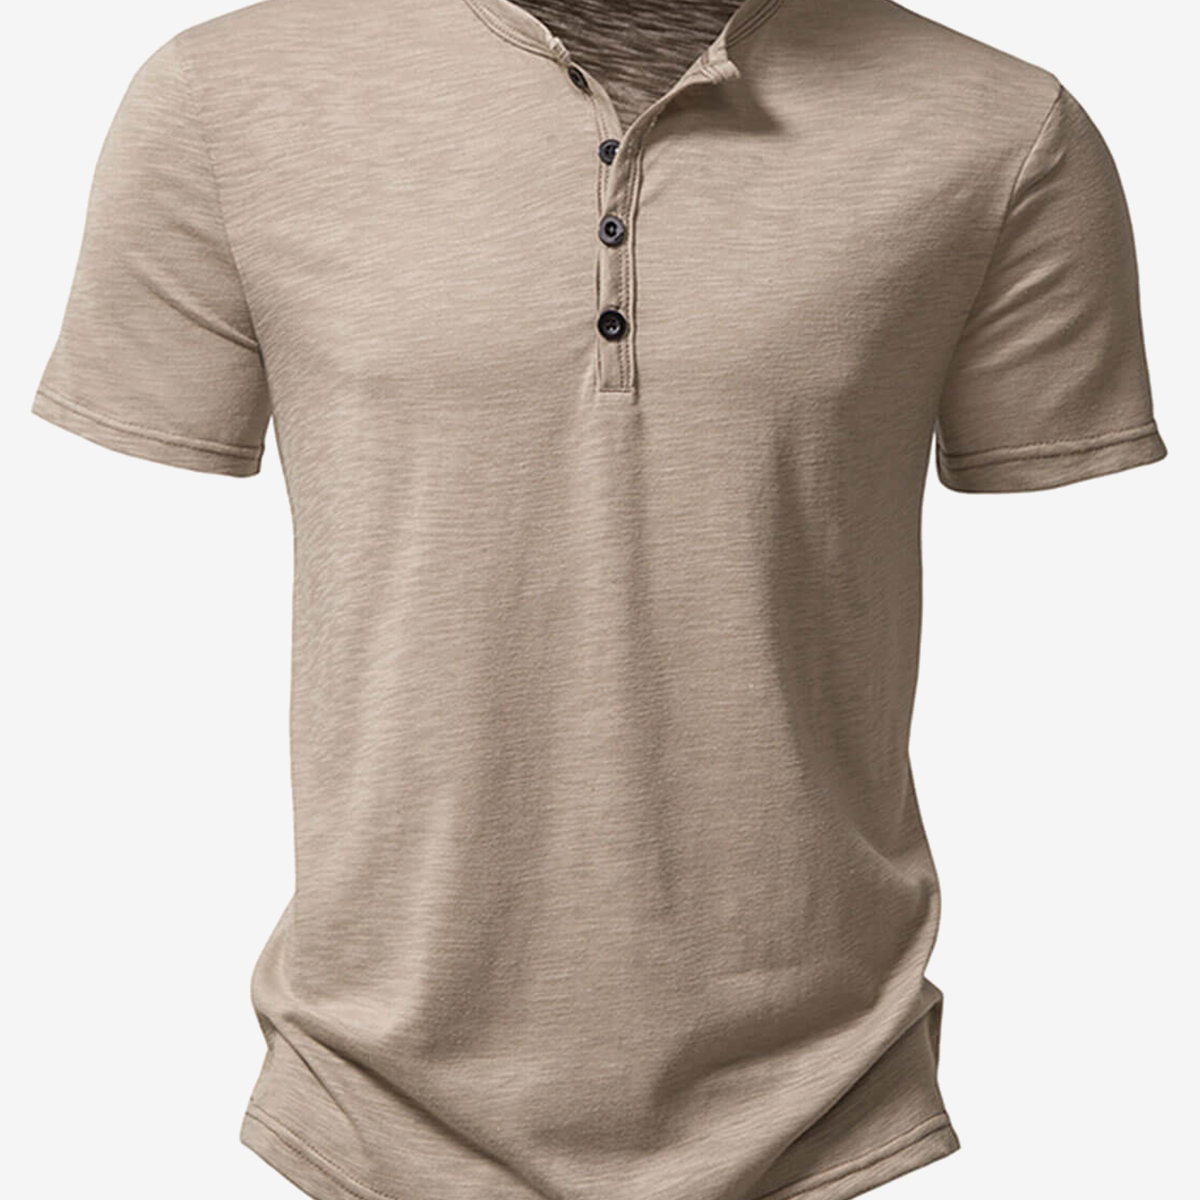 Men's Summer Solid Color Casual Short Sleeve T-Shirt